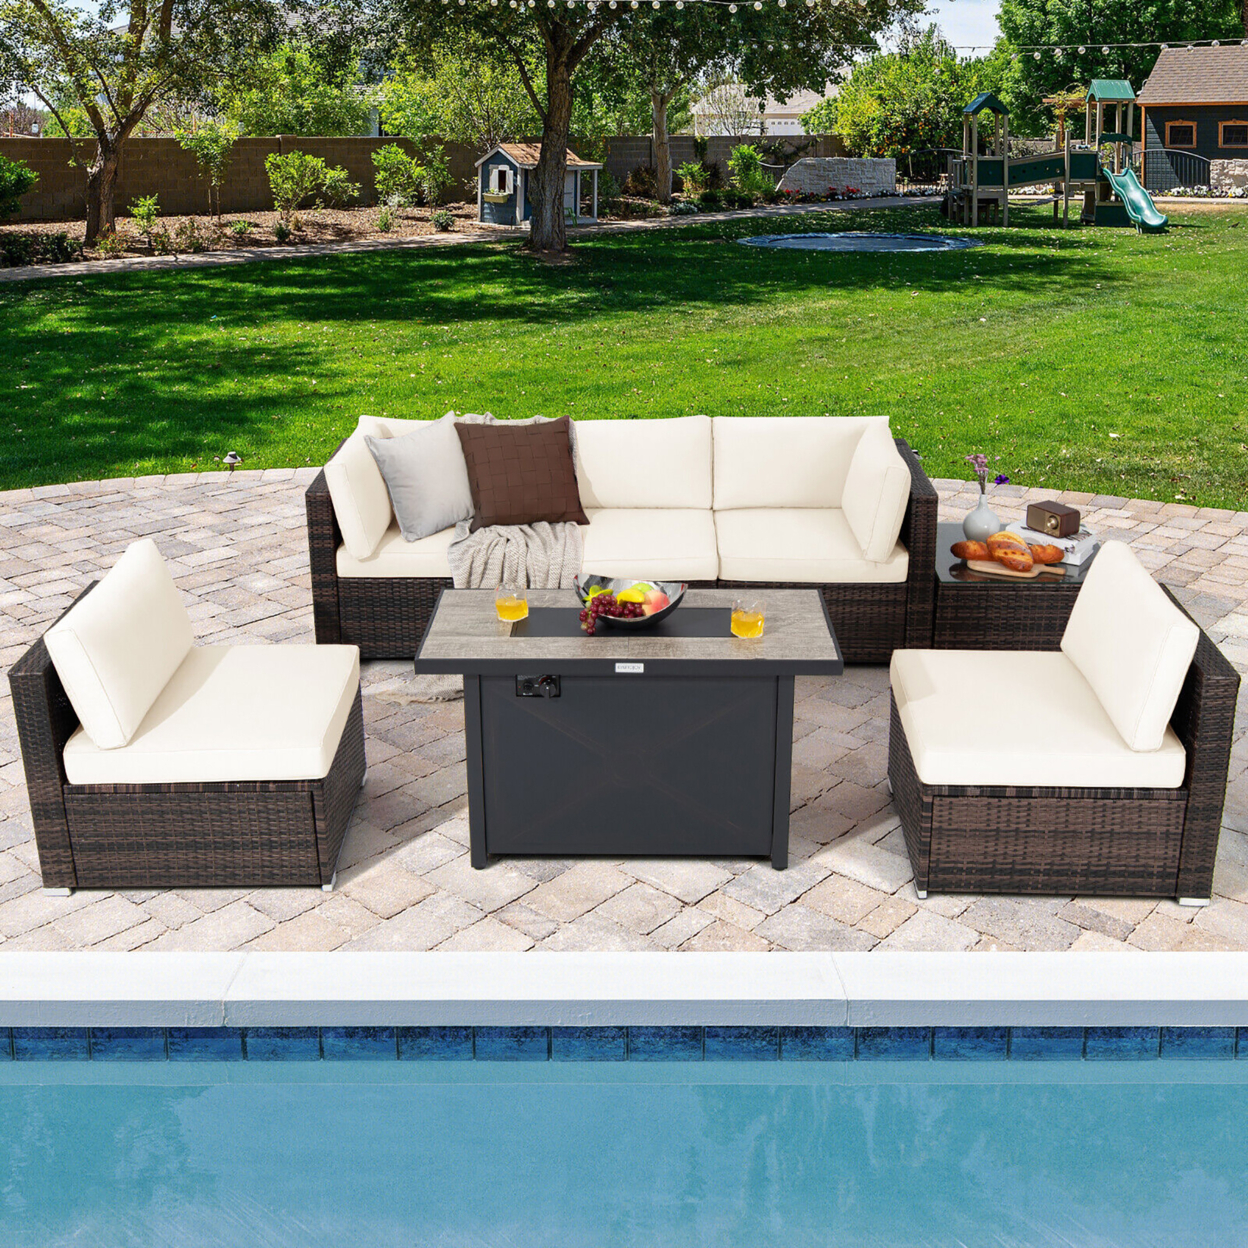 7PCS Patio Rattan Furniture Set Fire Pit Table Cover Cushion - Off White